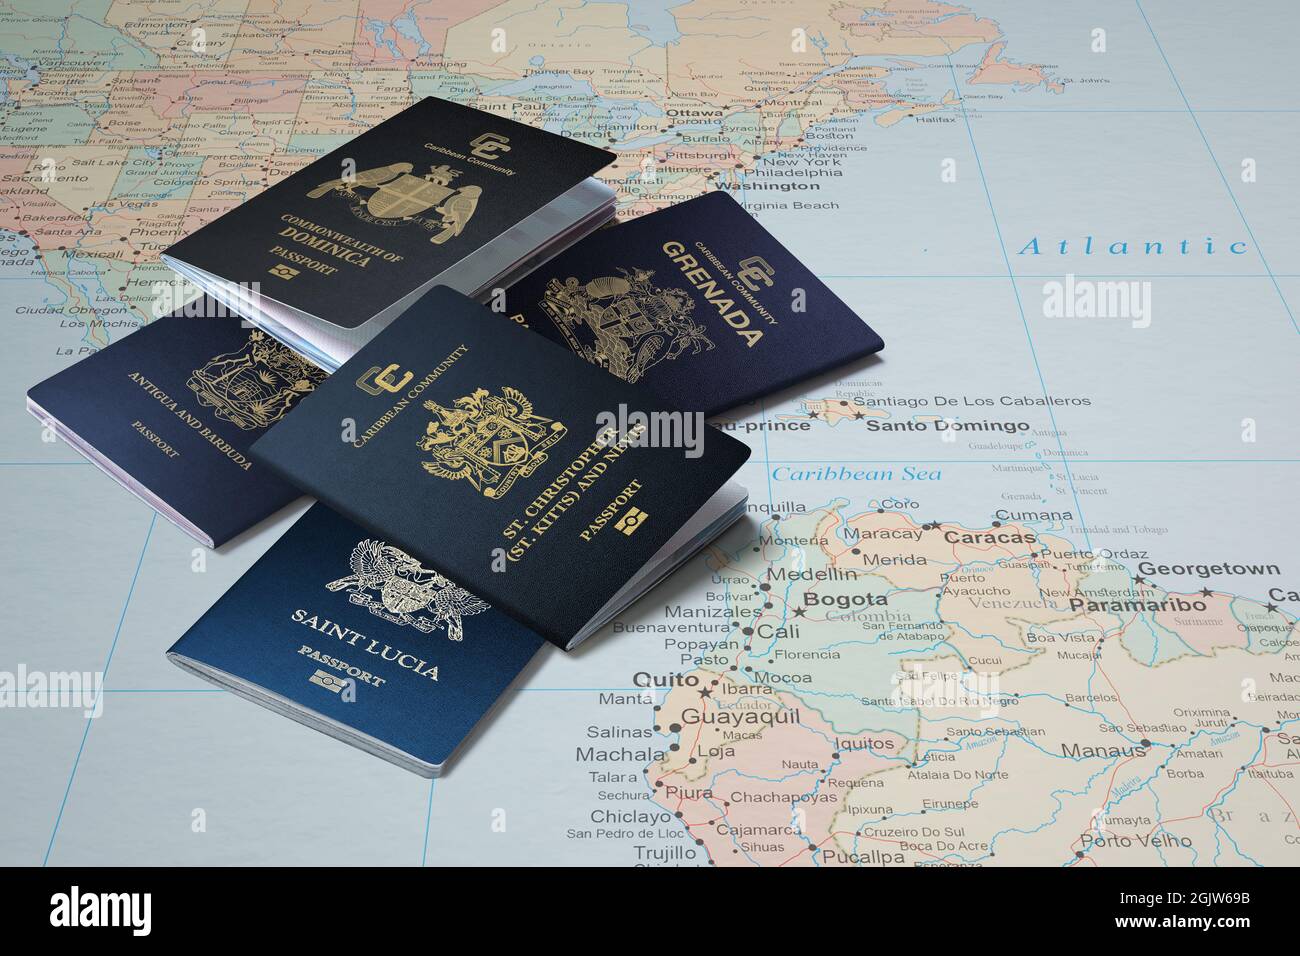 The passport of the Caribbean countries On world map ,Caribbean passports, Dominica, Saint Kitts and Nevis, Grenada, Saint Lucia, Antigua and Barbuda Stock Photo